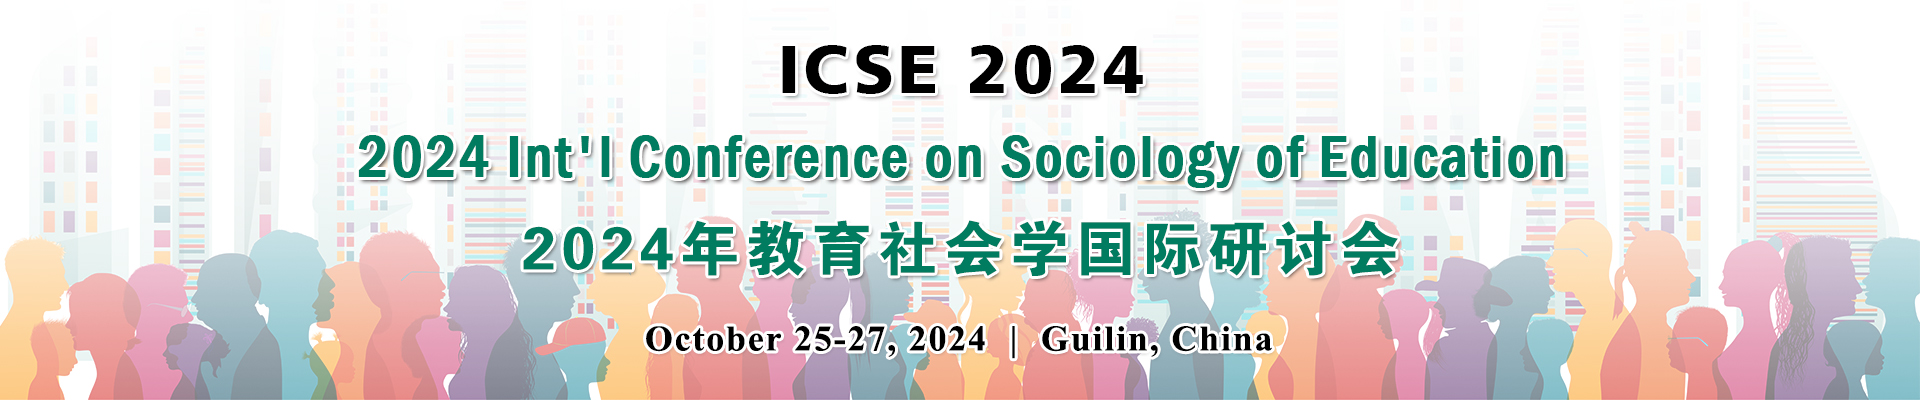 2024 Int'l Conference on Sociology of Education (ICSE 2024), Guilin, Guangxi, China